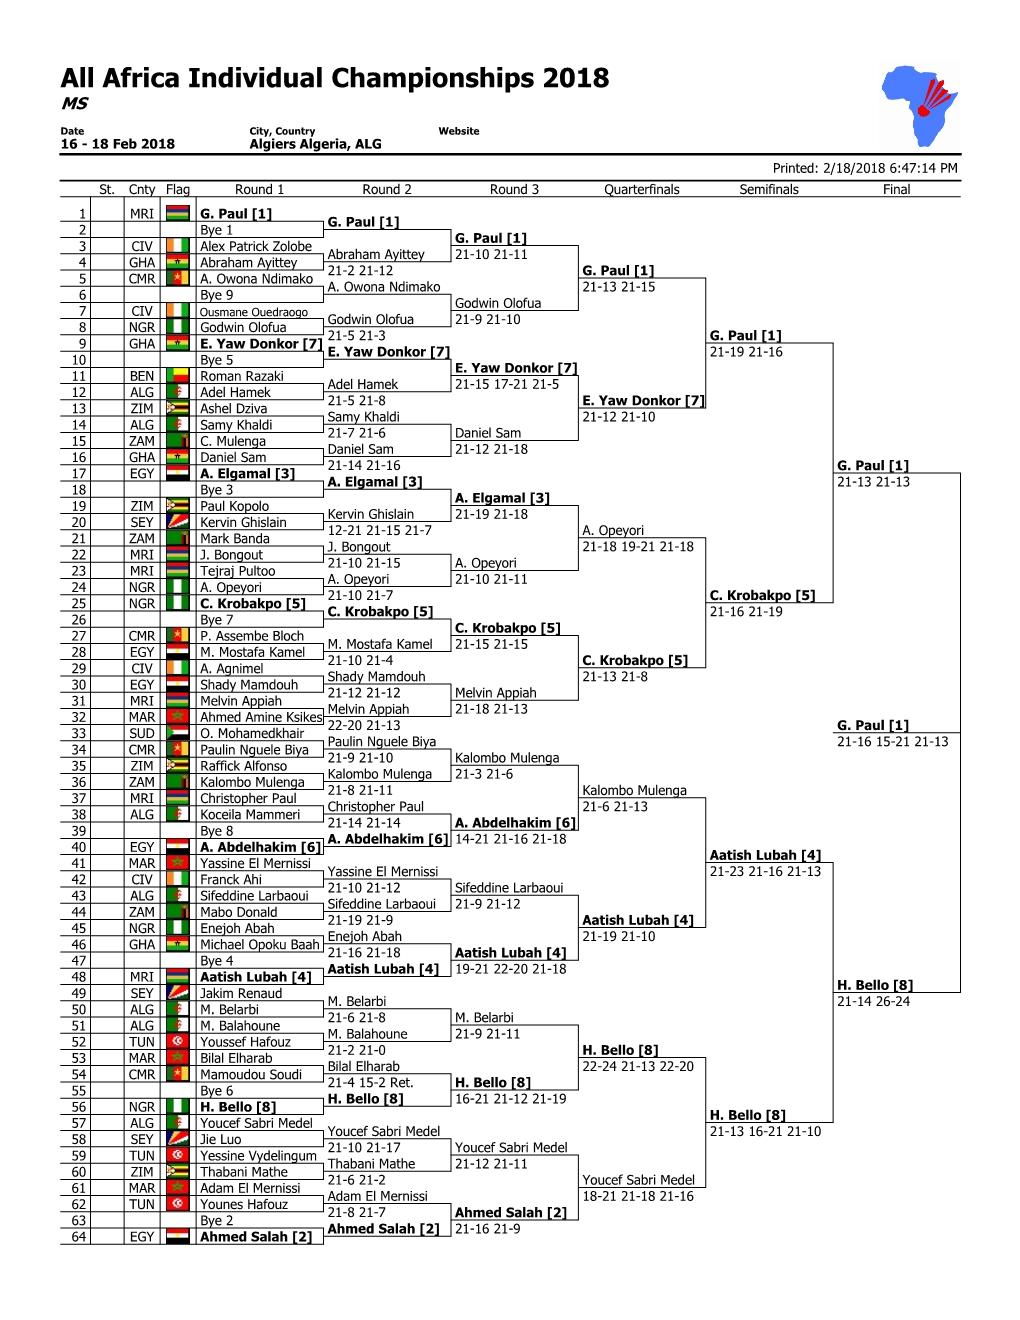 All Africa – Finals Results